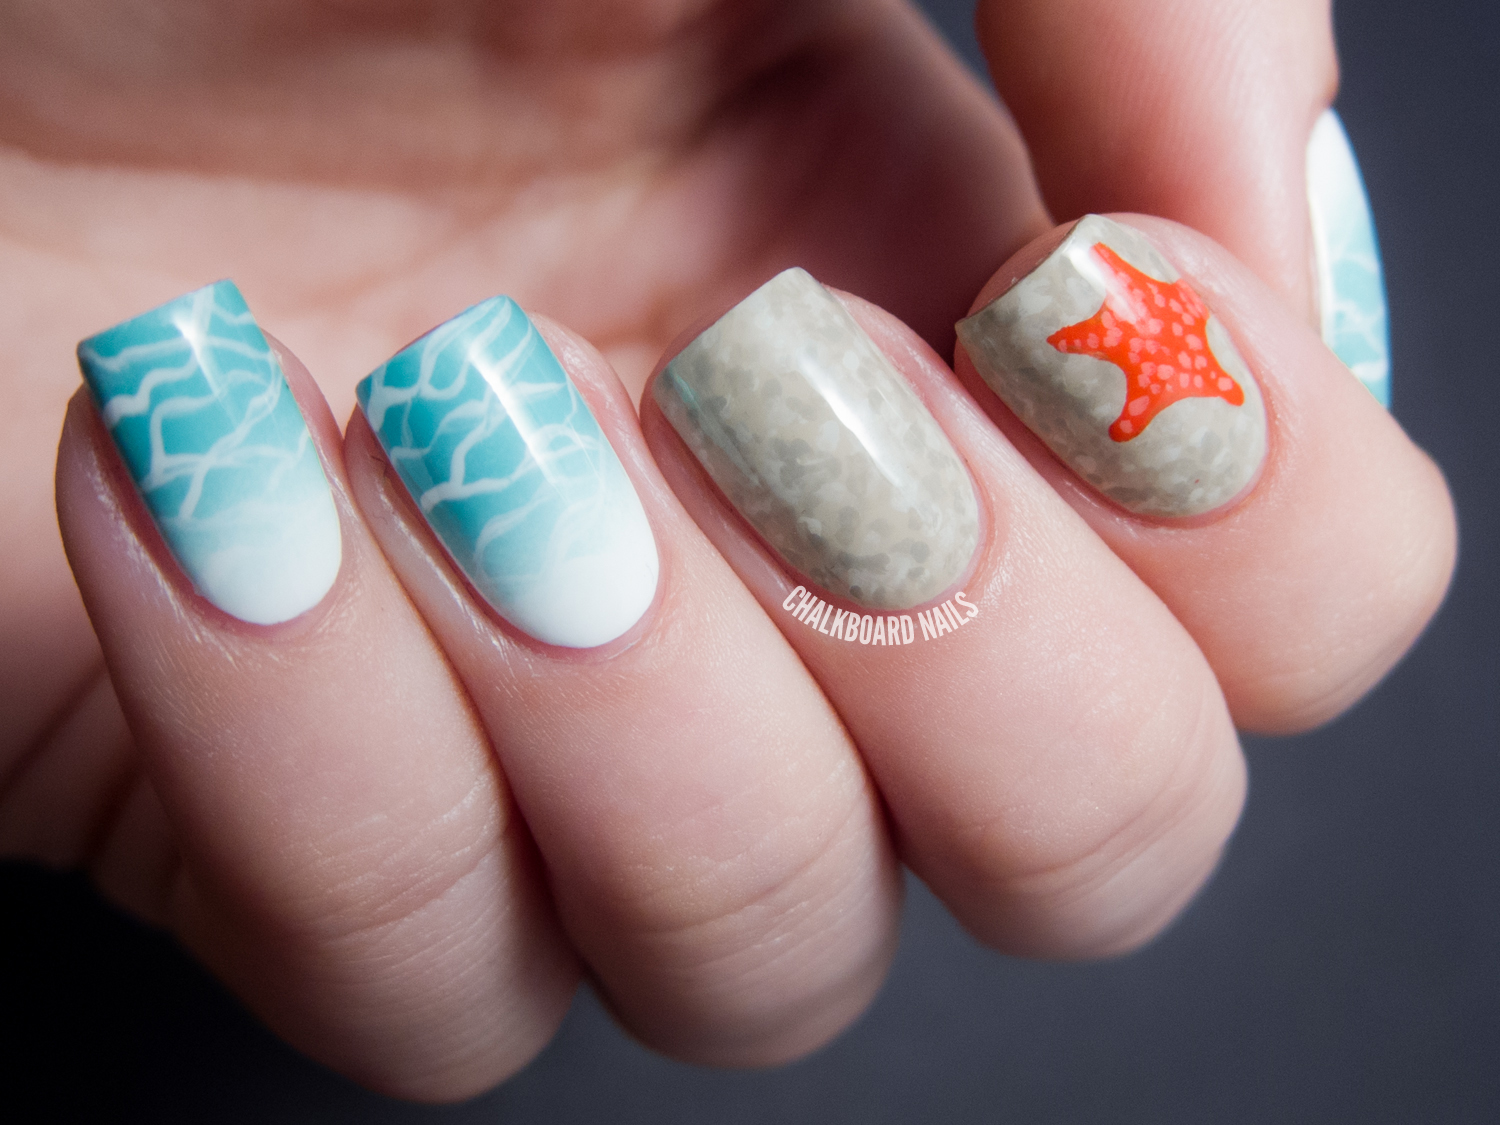 10. Dragonfly nail designs for summer beach trips - wide 7